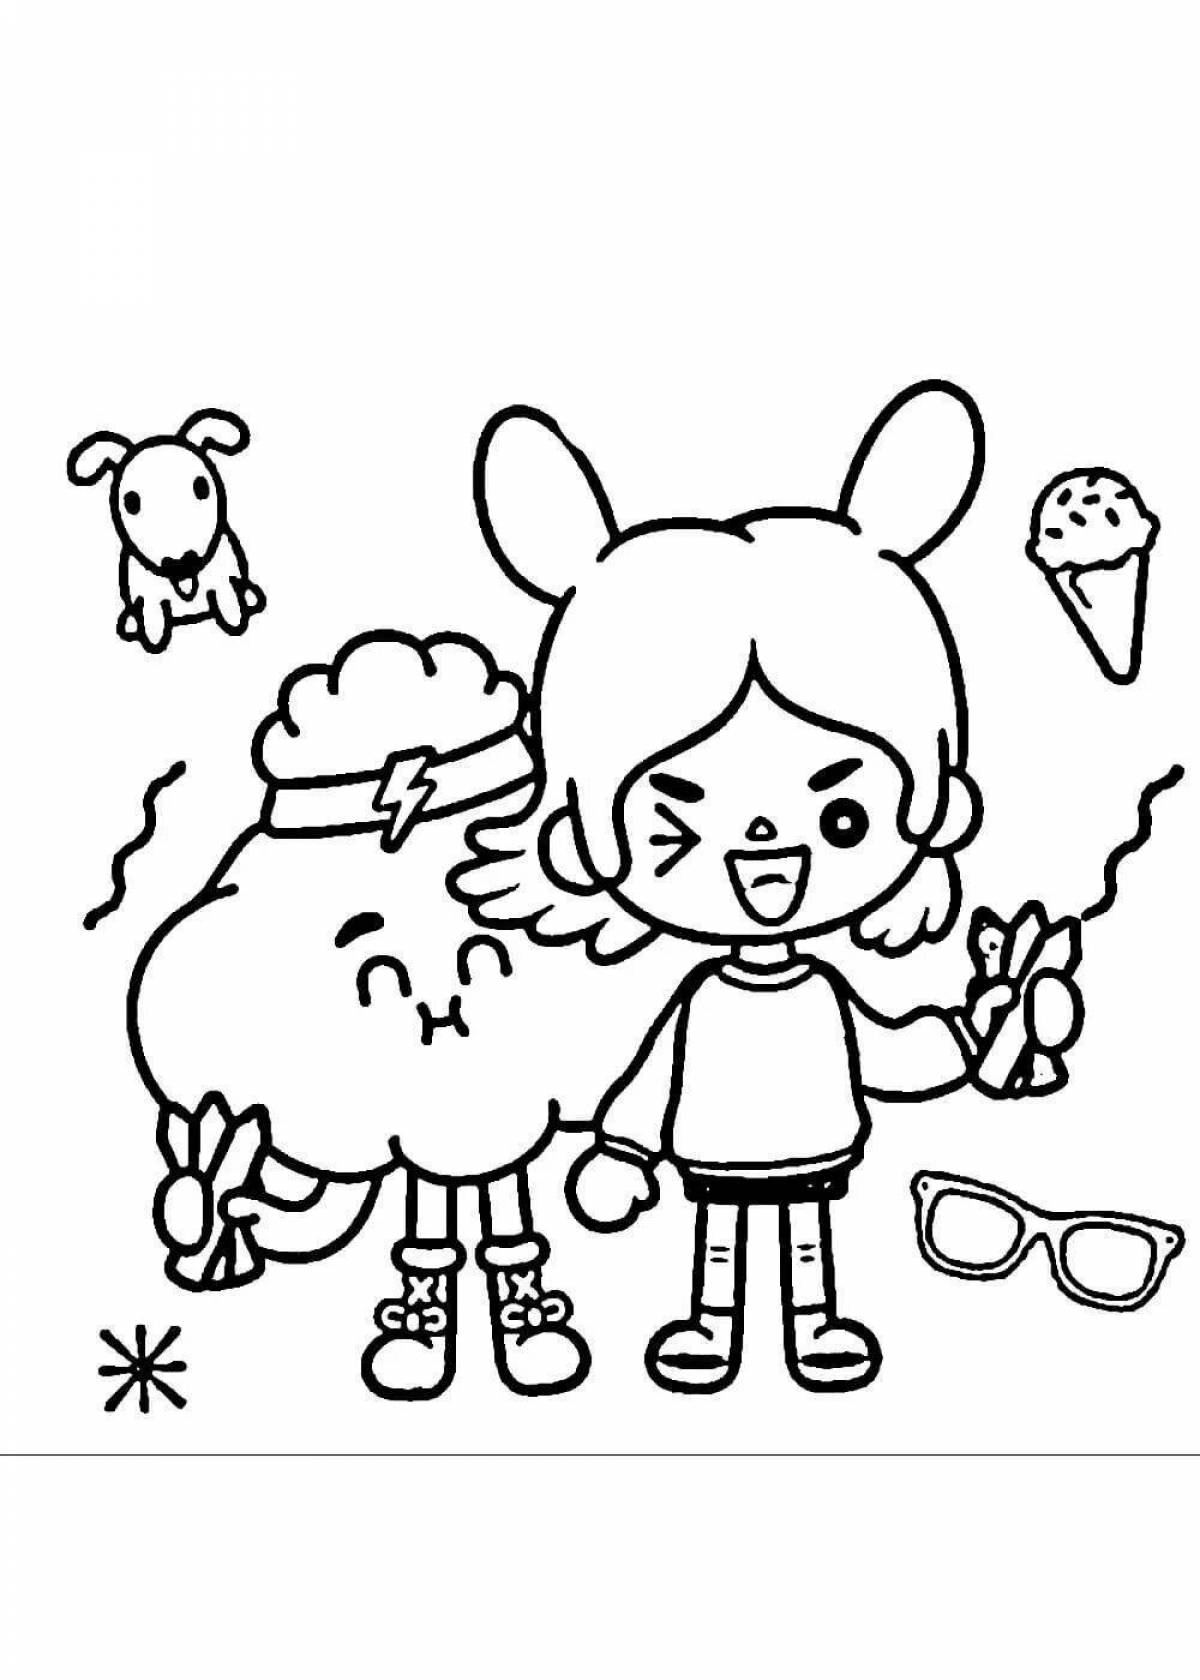 Flawless white current side coloring page